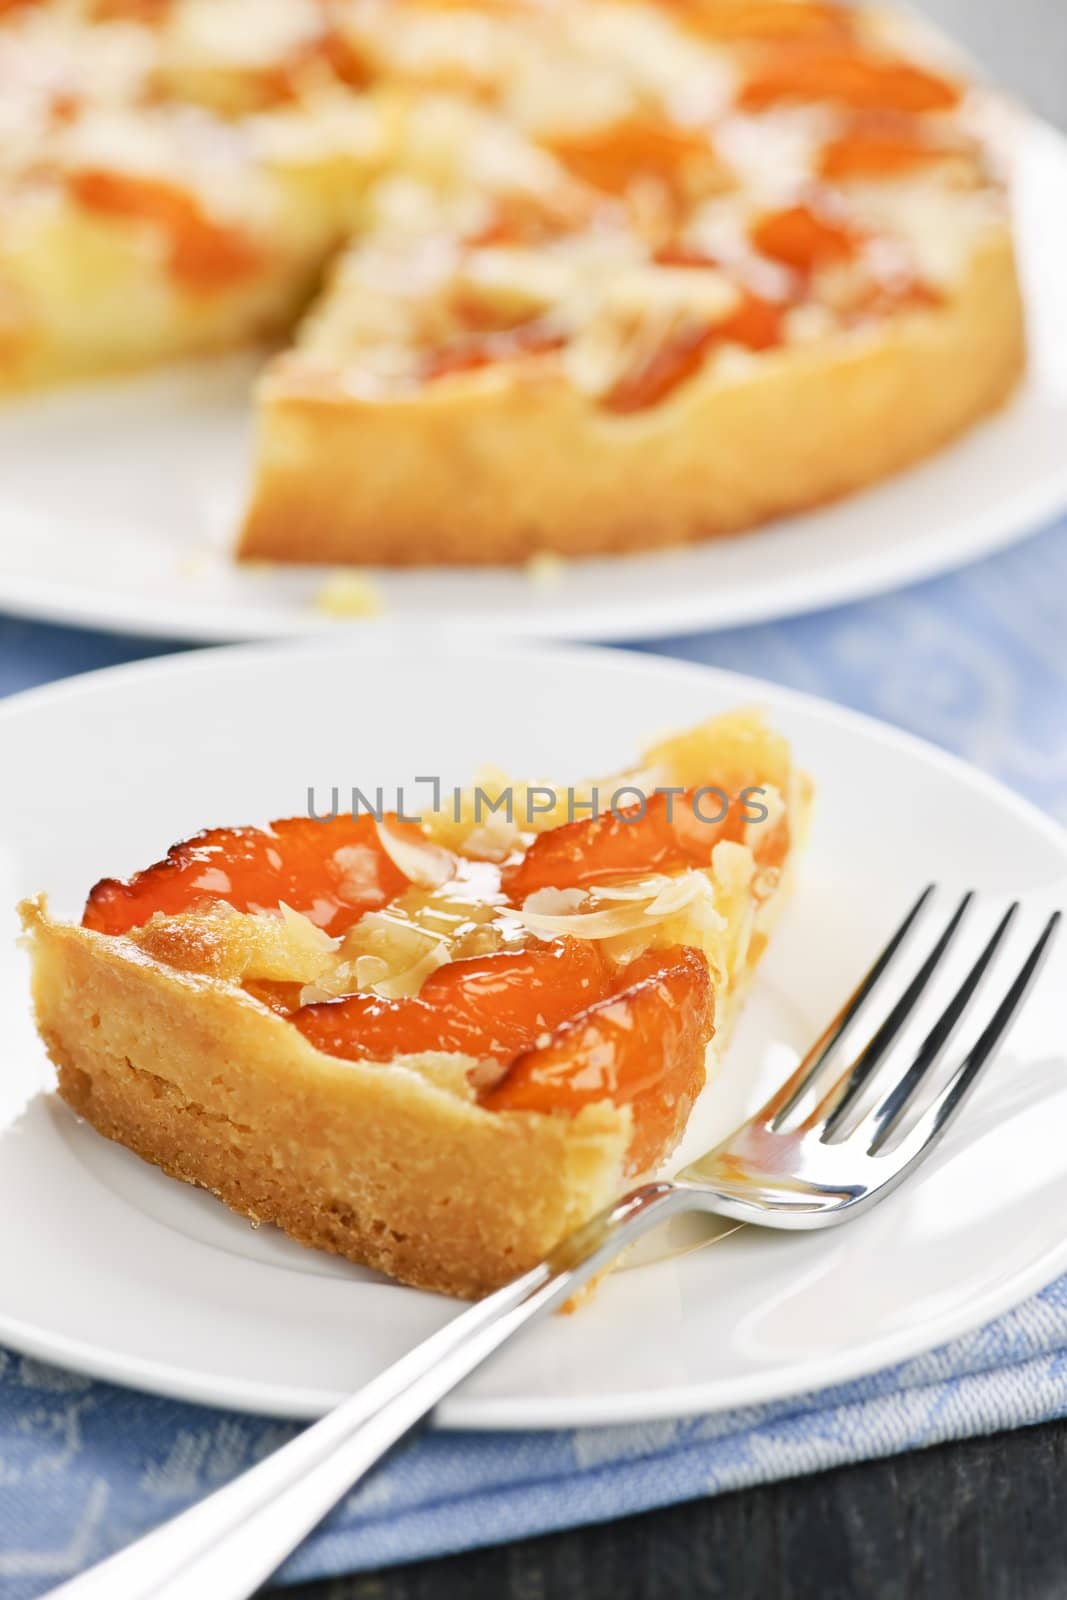 Slice of fresh baked apricot and almond pie dessert